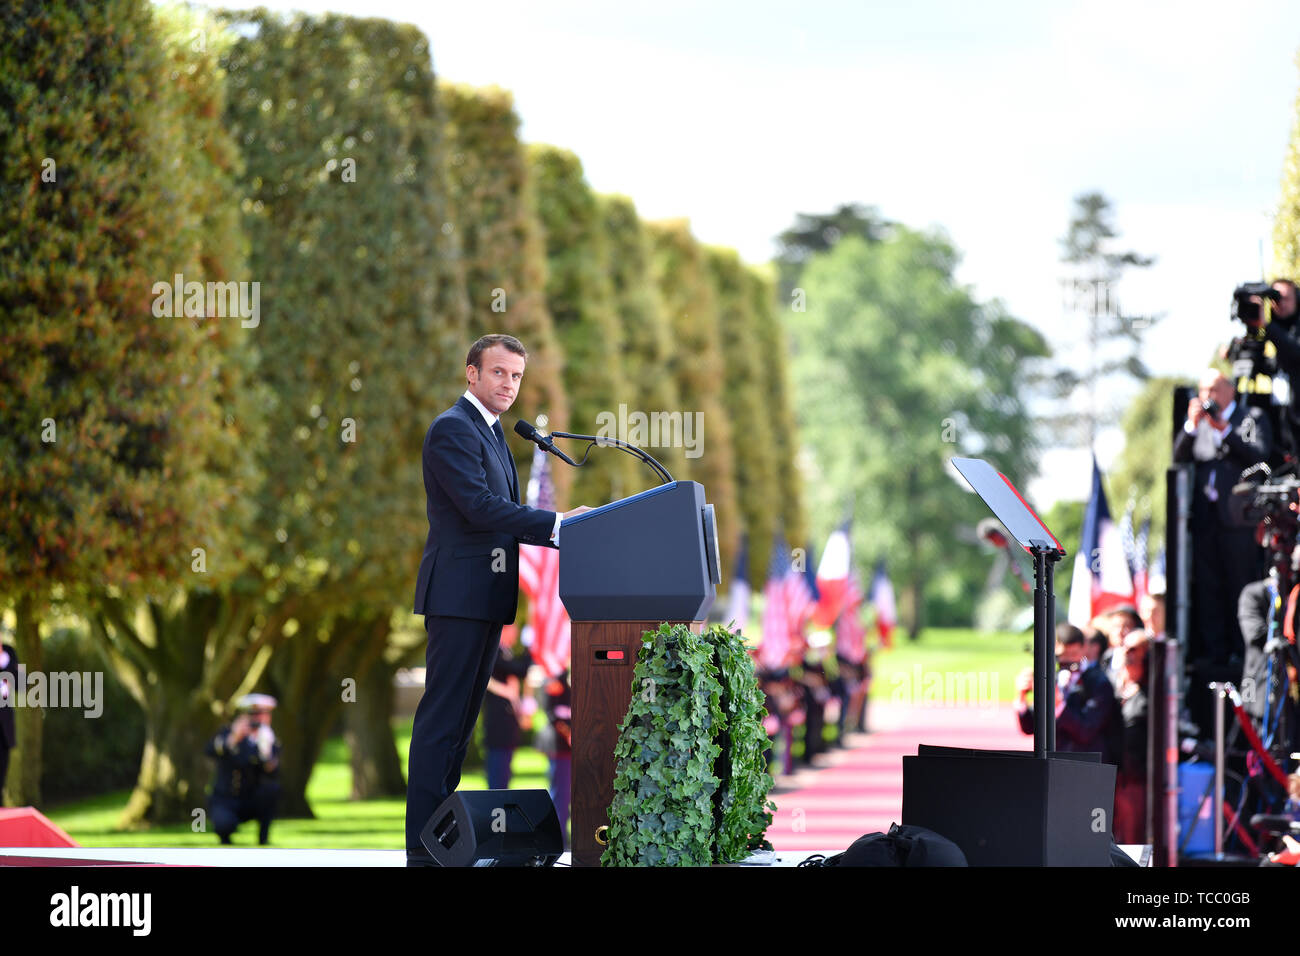 Colleville Sur Mer, France. 06th June, 2019. French President Emmanuel Macron delivers his address during a commemoration ceremony marking the 75th D-Day Anniversary at the Normandy American Cemetery and Memorial June 6, 2019 in Colleville-sur-Mer, France. Thousands have converged on Normandy to commemorate the 75th anniversary of Operation Overlord, the WWII Allied invasion commonly known as D-Day. Credit: Planetpix/Alamy Live News Stock Photo